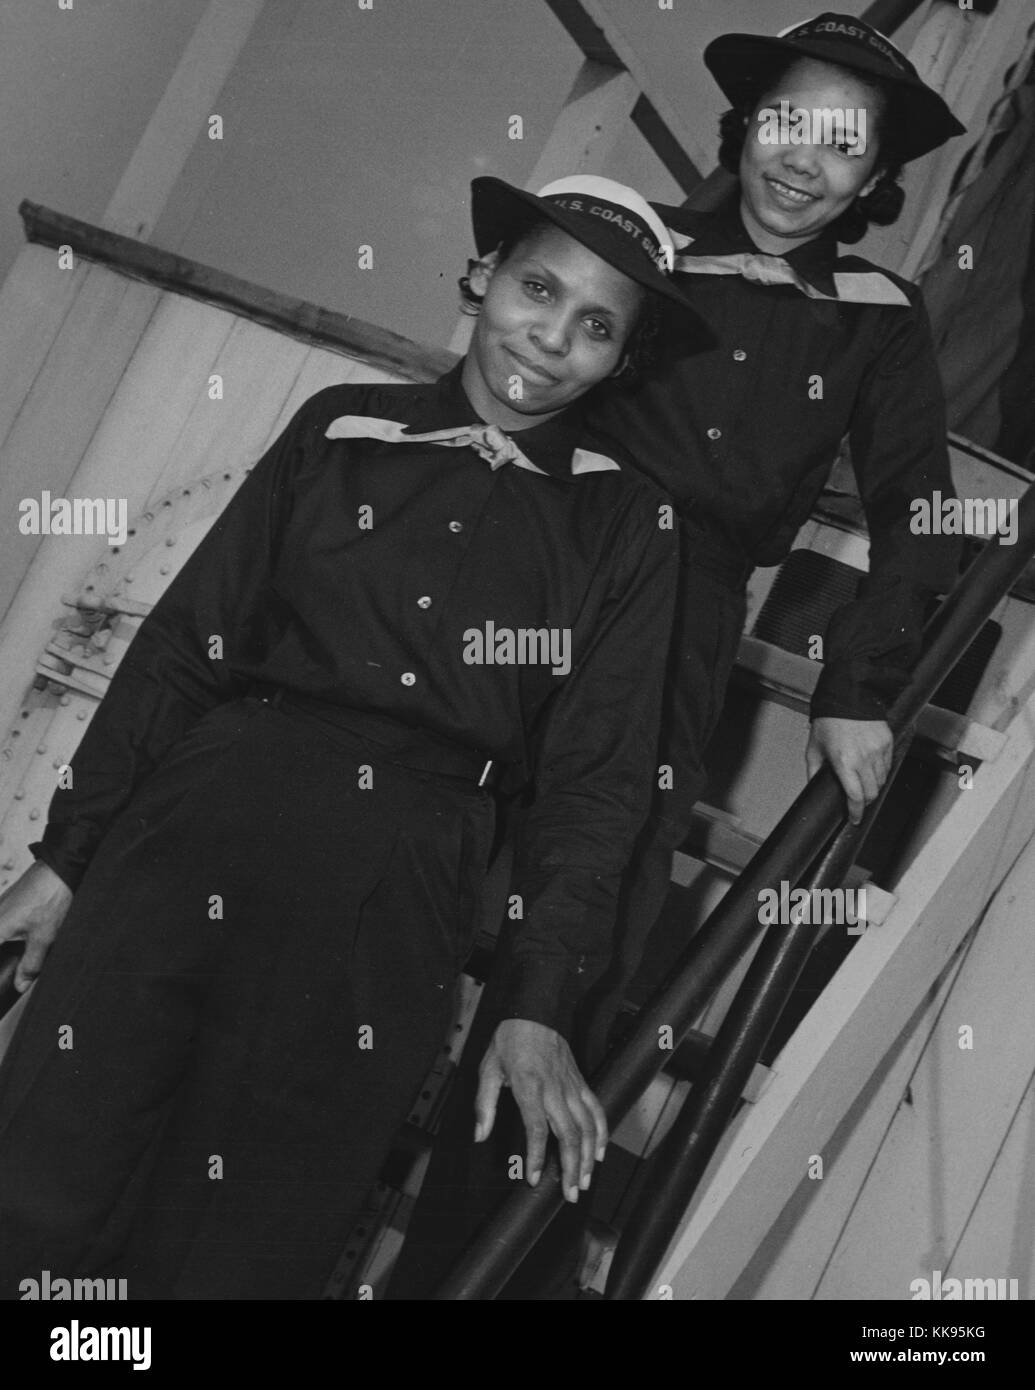 A photograph of Olivia Hooker and Aileen Anita Cooke in United States Coast Guard uniforms, on the left is Hooker who was the first African-American woman to join the United States Coast Guard, she was a member of the United States Coast Guard Womens Reserve which was known as SPARS until 1946 when her unit was disbanded, Cooke appears behind her on the right, they are aboard the USS Neversail which was a USCG dry-land training ship, Brooklyn, New York, 1943. From the New York Public Library. Stock Photo